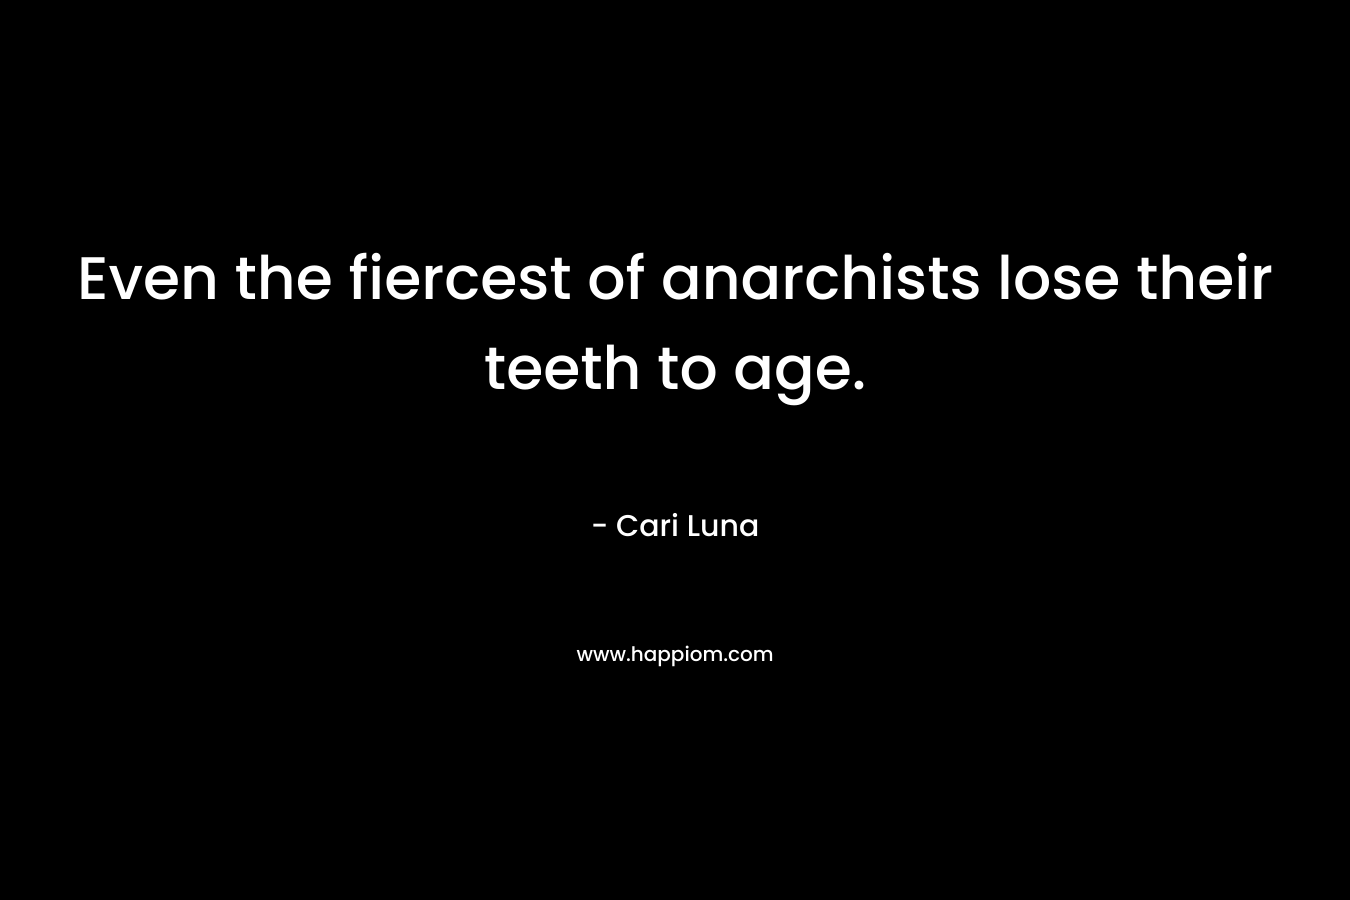 Even the fiercest of anarchists lose their teeth to age. – Cari Luna